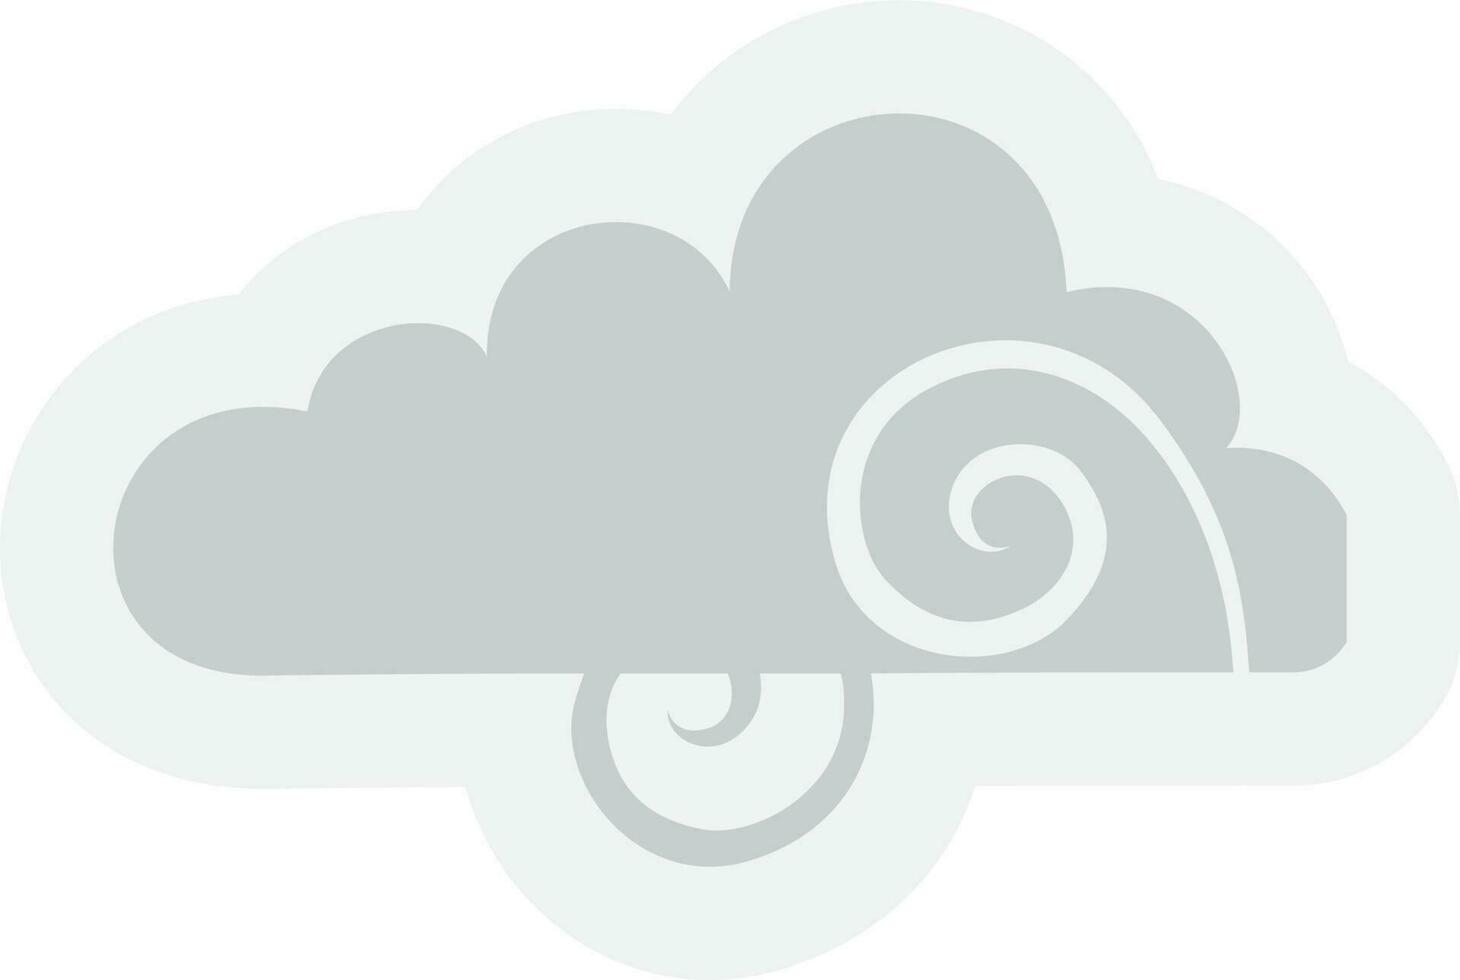 Gray cloud in flat style illustration. vector